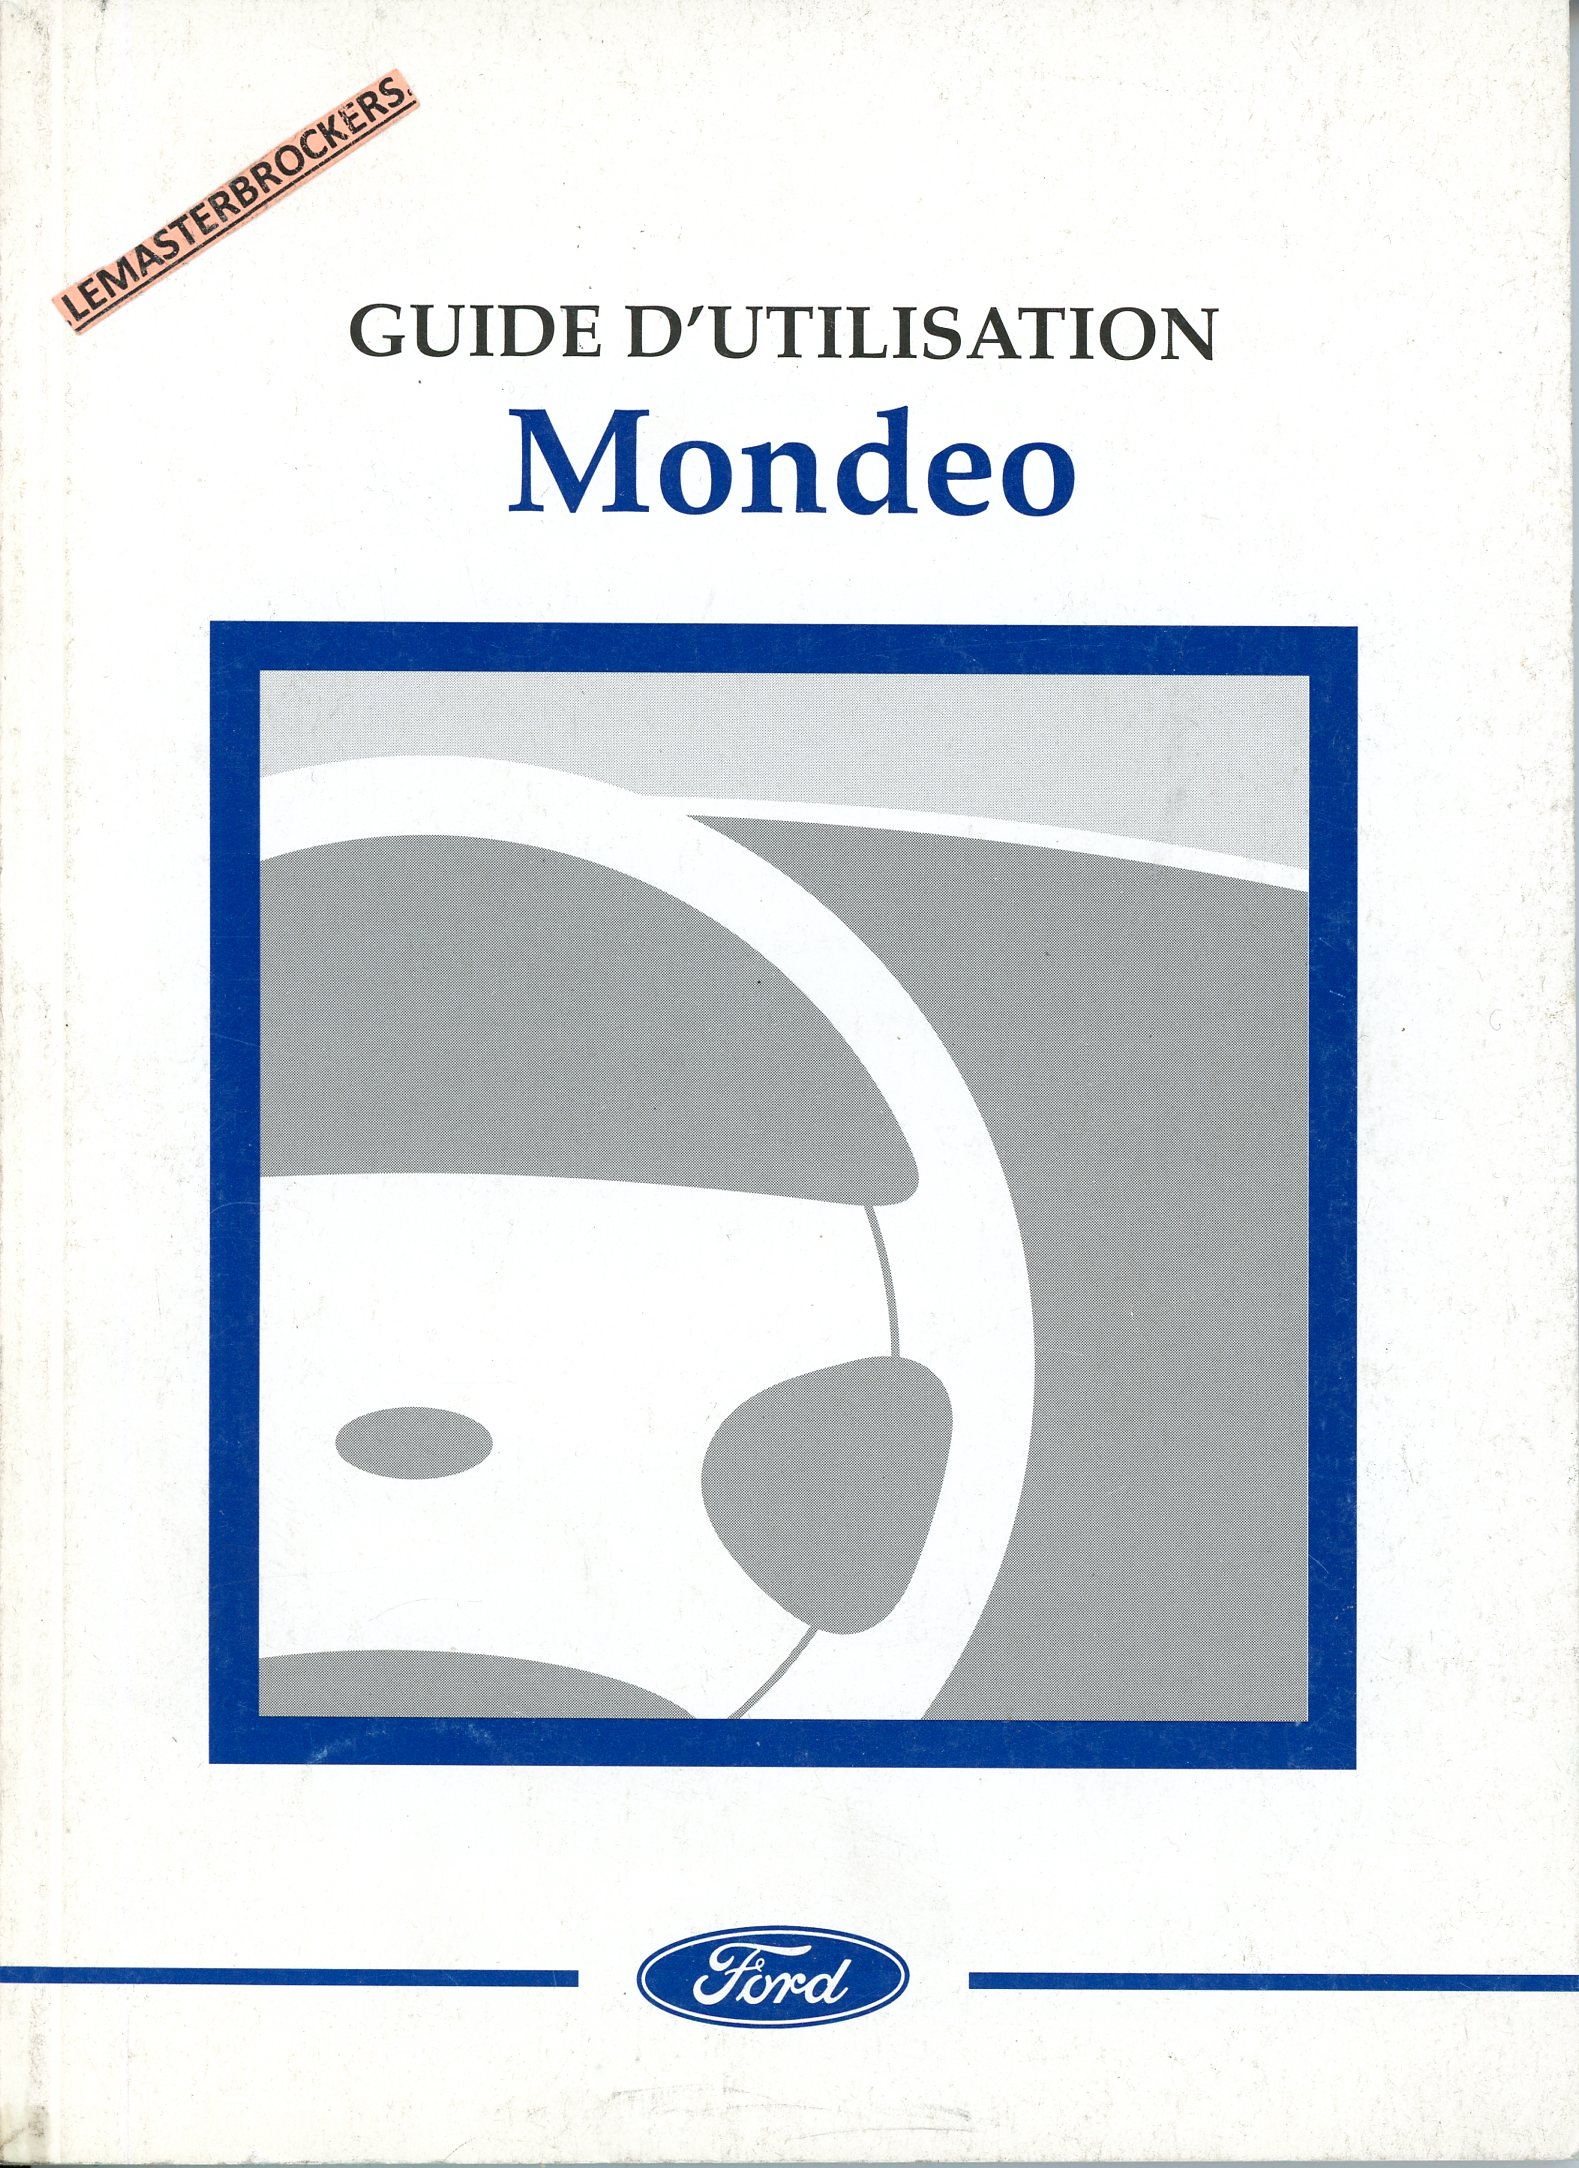 FORD-MONDEO-GUIDE-CARNET-NOTICE-MANUEL--LEMASTERBROCKERS